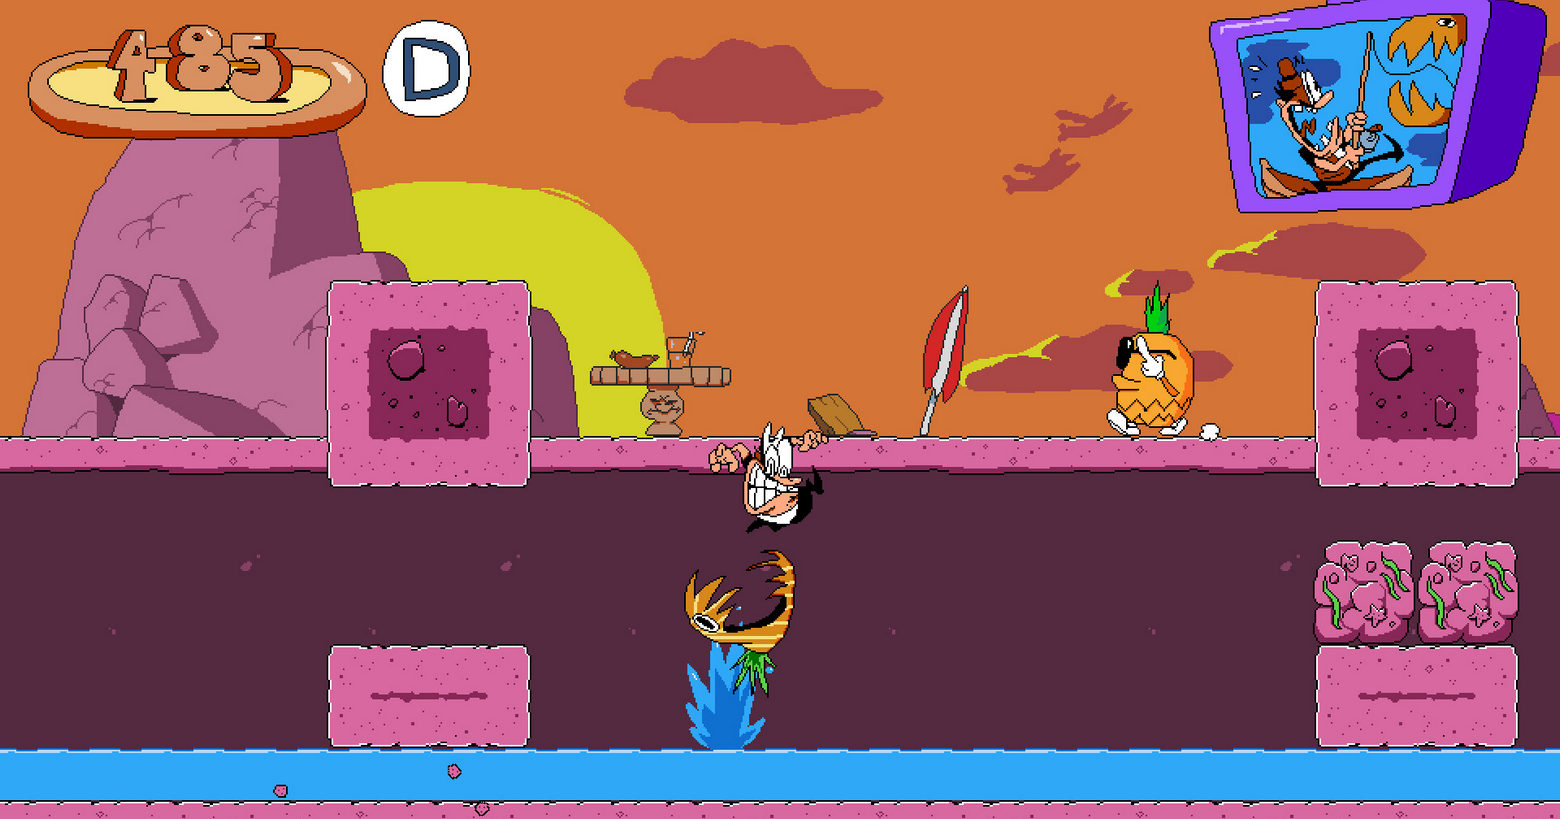 This screenshot from Pizza Tower shows the playable protagonist Peppino Spaghetti in the center of the screen in a long shot. The scene is hand-drawn and strongly reminds us of the 2D platformers from the 90s. The player is jumping over an orange flesh-eating plant that is trying to eat him. It stands at the bottom center of the screen on a blue background. Peppino has big insanely distorted white eyes and a contorted big mouth, so we can see his many white teeth. In his look, we can read the thought "Just don't get to the plant". Directly above him is another horizontal pink plane, with an orange with black glasses walking in his direction on the right. To the left and right of the image we glimpse several different-sized rectangular pink rocks and in the background is an orange sky with dark orange clouds and a pink mountain to the upper left. At the top left we see the score in orange and to the right, the current rank is black and white. In the upper right corner, we see a drawn tube monitor, on which Peppino is shown on a wooden boat, looking panic-stricken into the throat of a carnivorous plant, which he has just pulled out of the water with his fishing rod. The game was recently released on Steam.